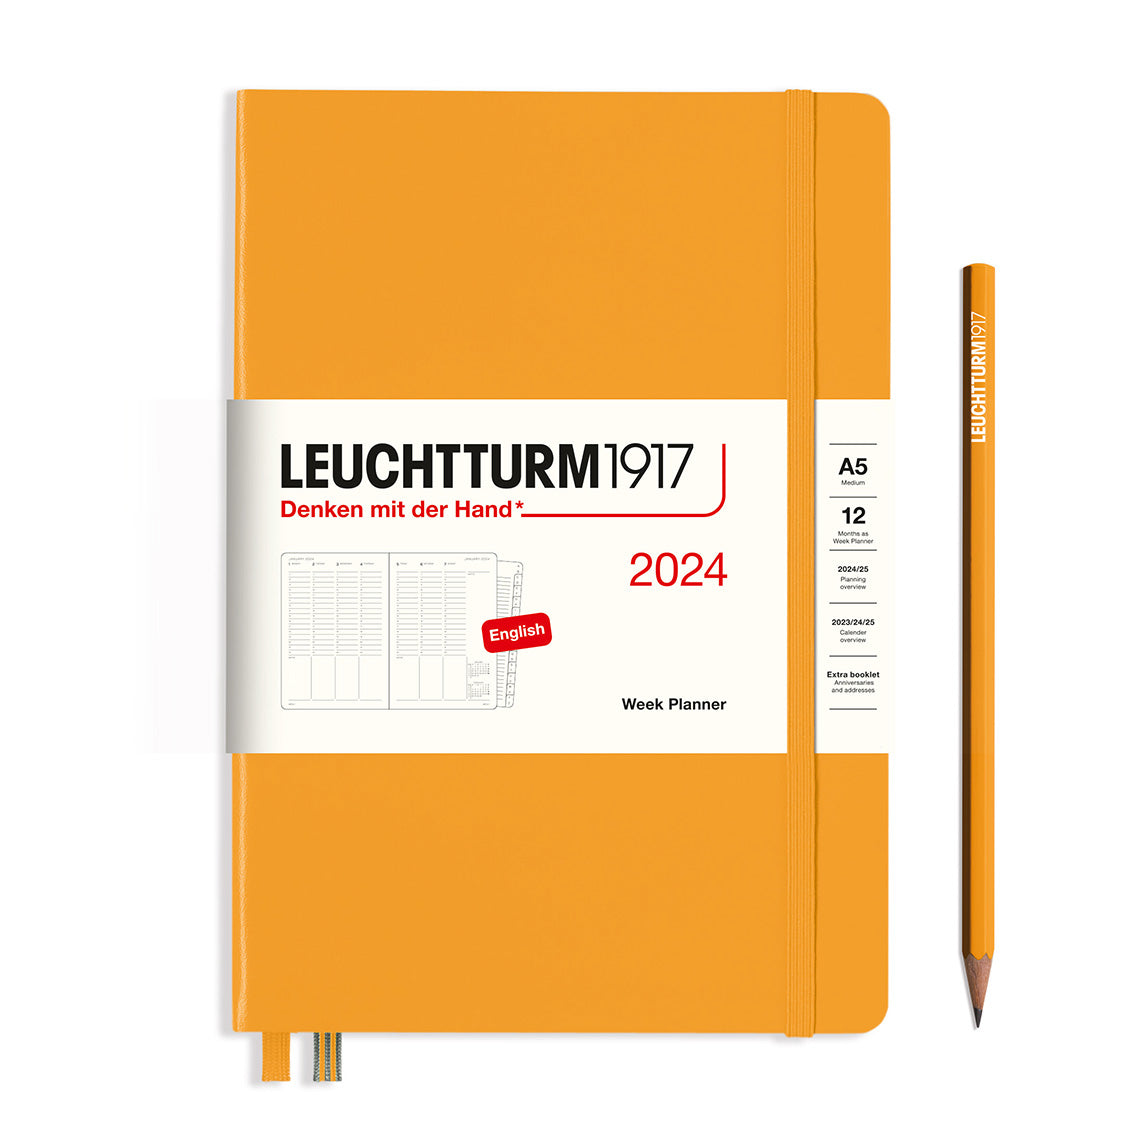 An image of an orange planner with an orange elastic band holding it together and a cream paper wrap around the middle stating the business name Leuchtturm1917, that it is for the year 2024, it is a week planner, is A5 in size and an English language version. It has an image on the wrap showing the inside layout which is a week across 2 pages set out as appointments. An orange pencil is shown at the side of the planner.